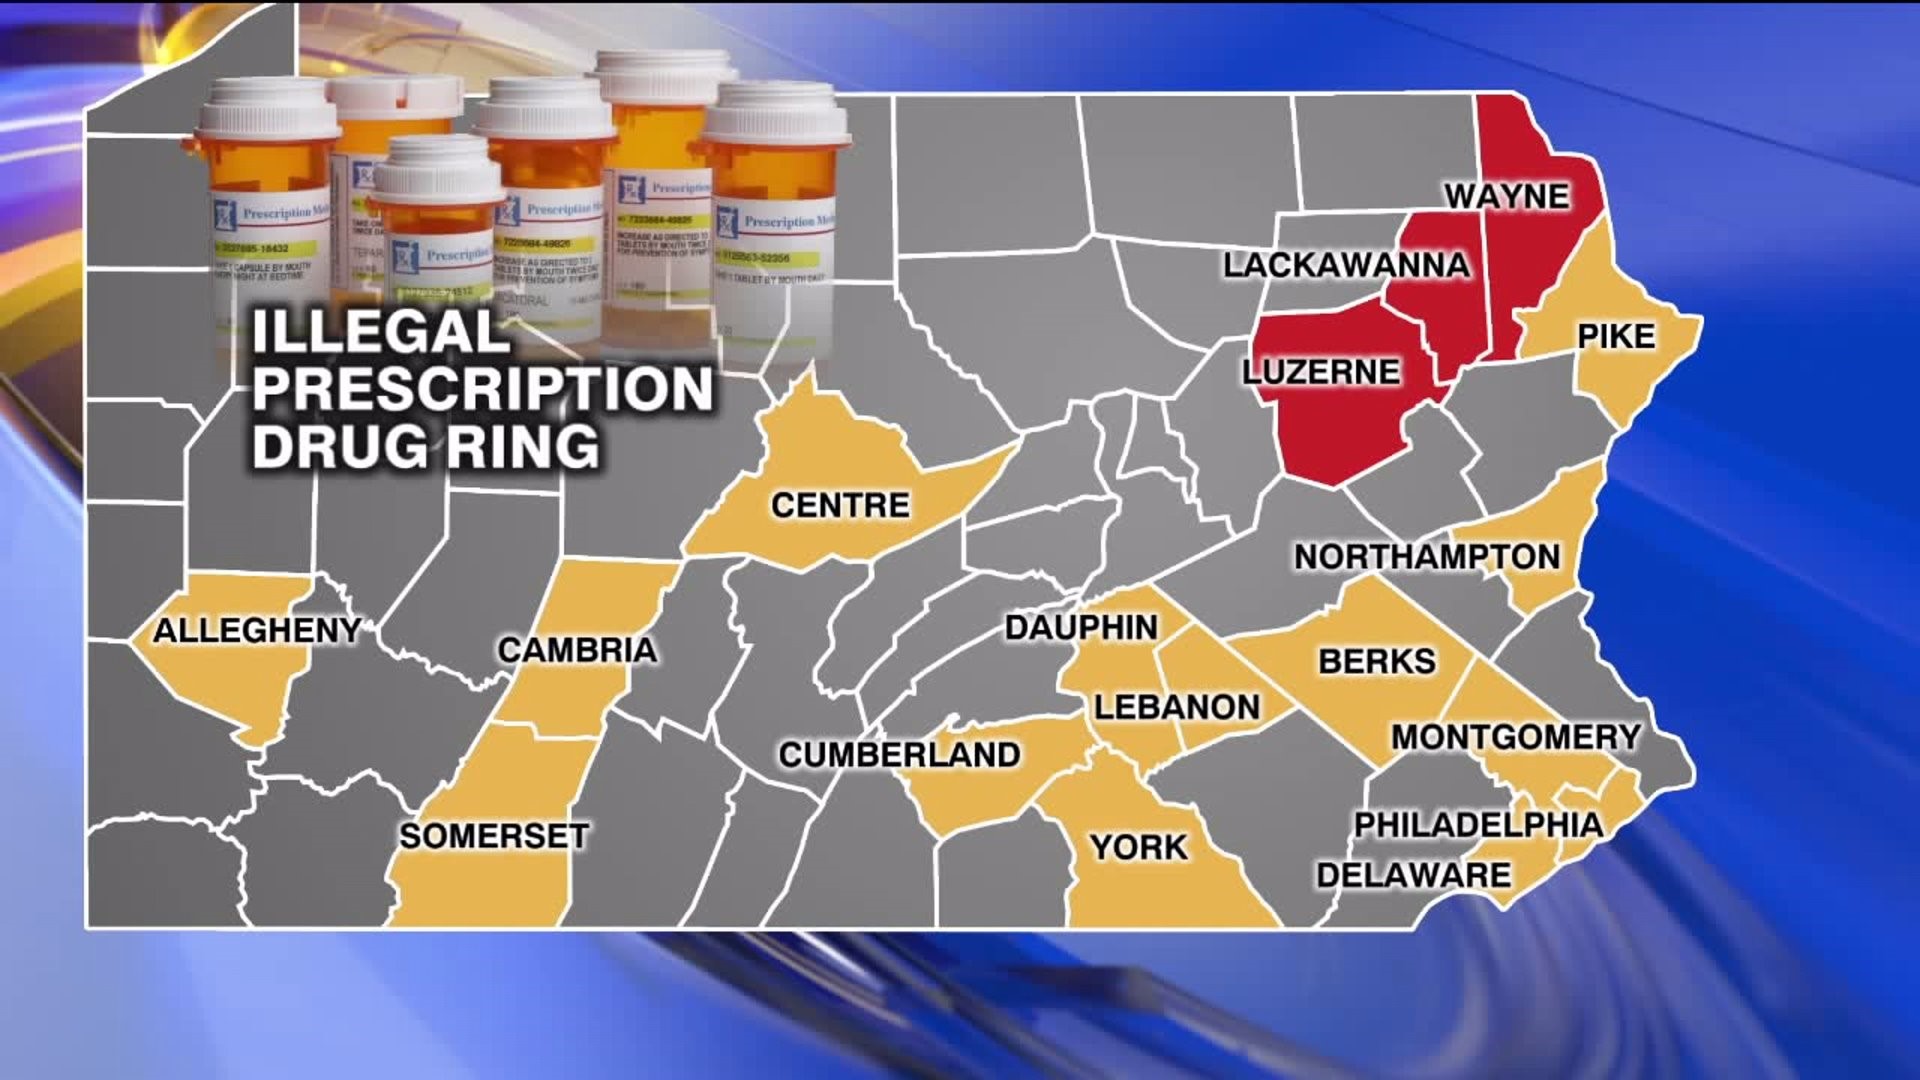 Doctor hailed by PA Attorney General for Sparking Investigation in Illegal Prescription Opioid Drug Ring